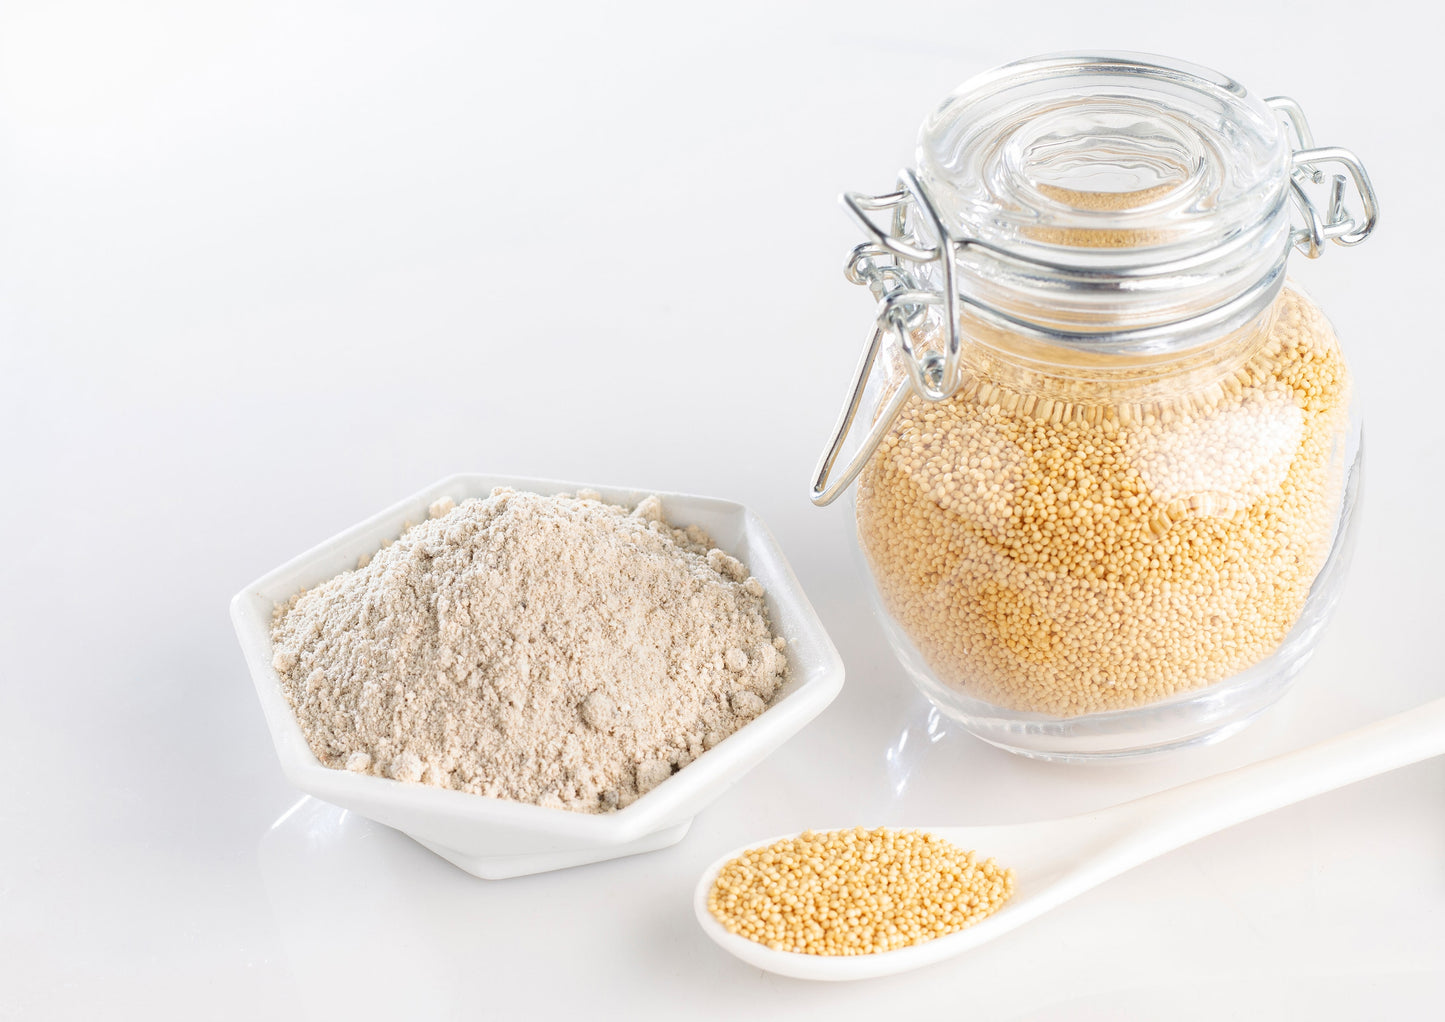 Amaranth Flour – Non-GMO Verified, Finely Milled Whole Amaranth Grains, Vegan, Kosher, Bulk. High in Dietary Fiber and Plant-Based Protein. Great Wheat Flour Substitute. Perfect for Baking